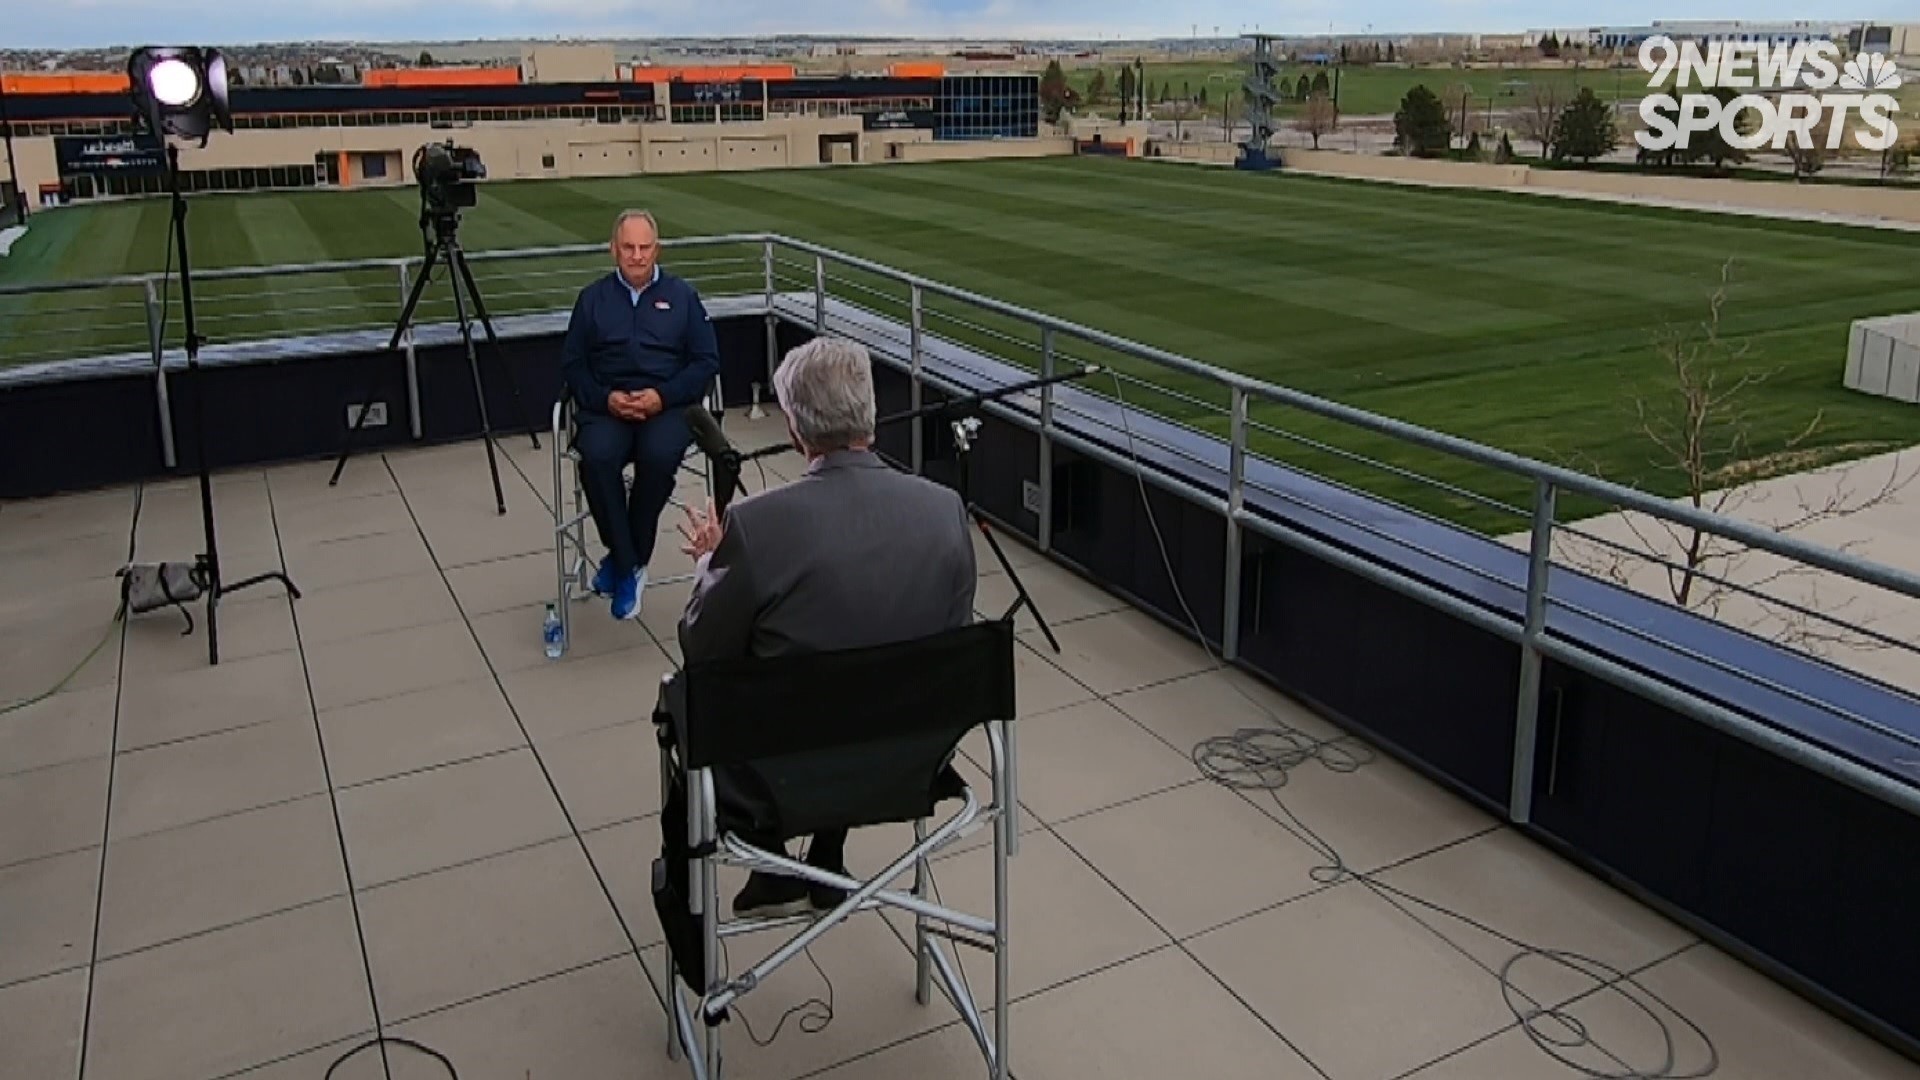 9NEWS insider Mike Klis sat down with Fangio to discuss the team's thinking in this year's NFL Draft.